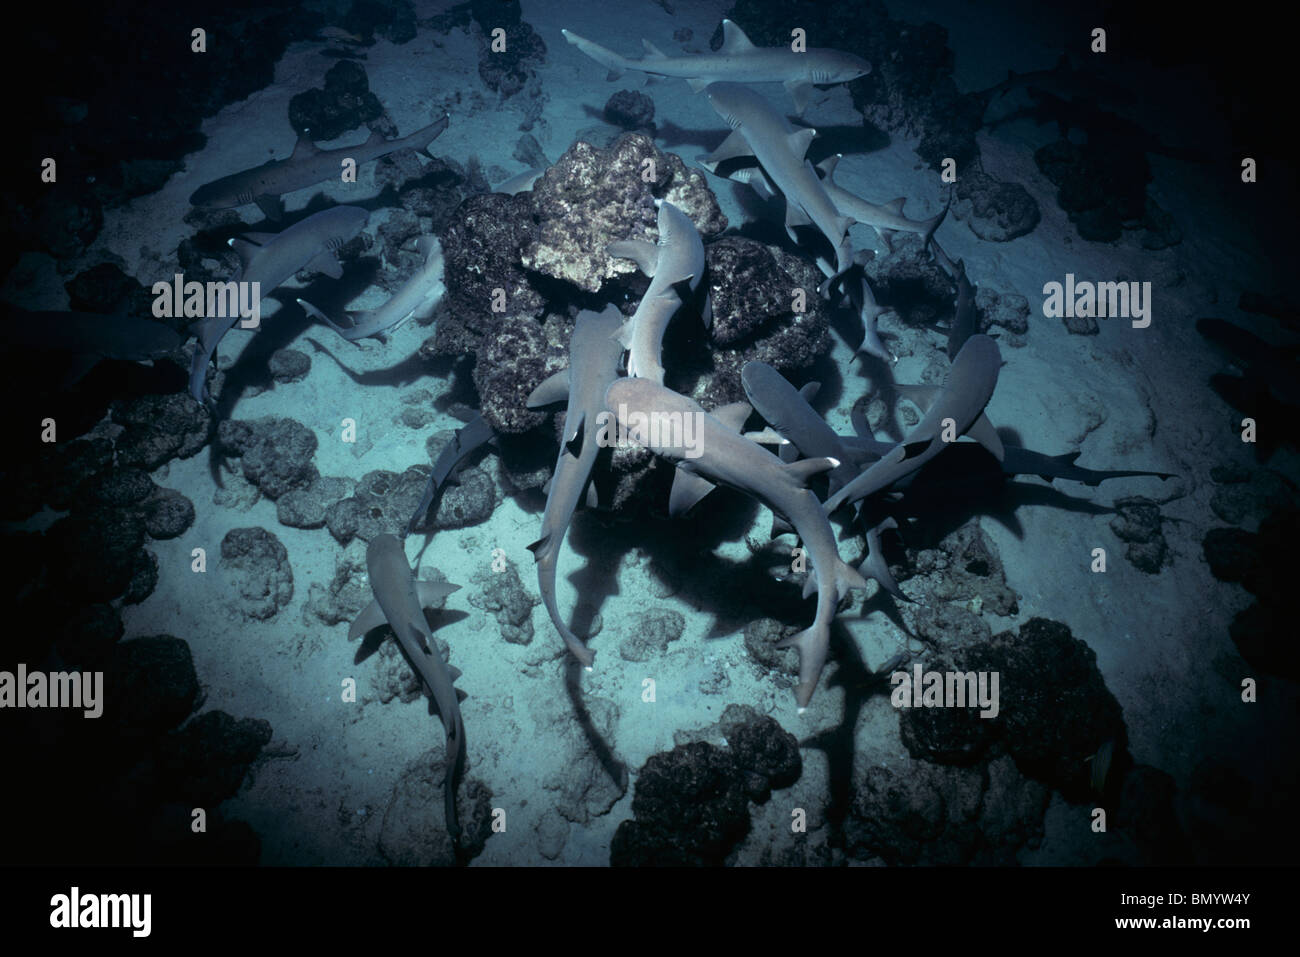 Whitetip Reef Sharks (Triaenodon obesus) hunt Surgeonfish in coral at night, Cocos Island, Costa Rica - Pacific Ocean. Stock Photo